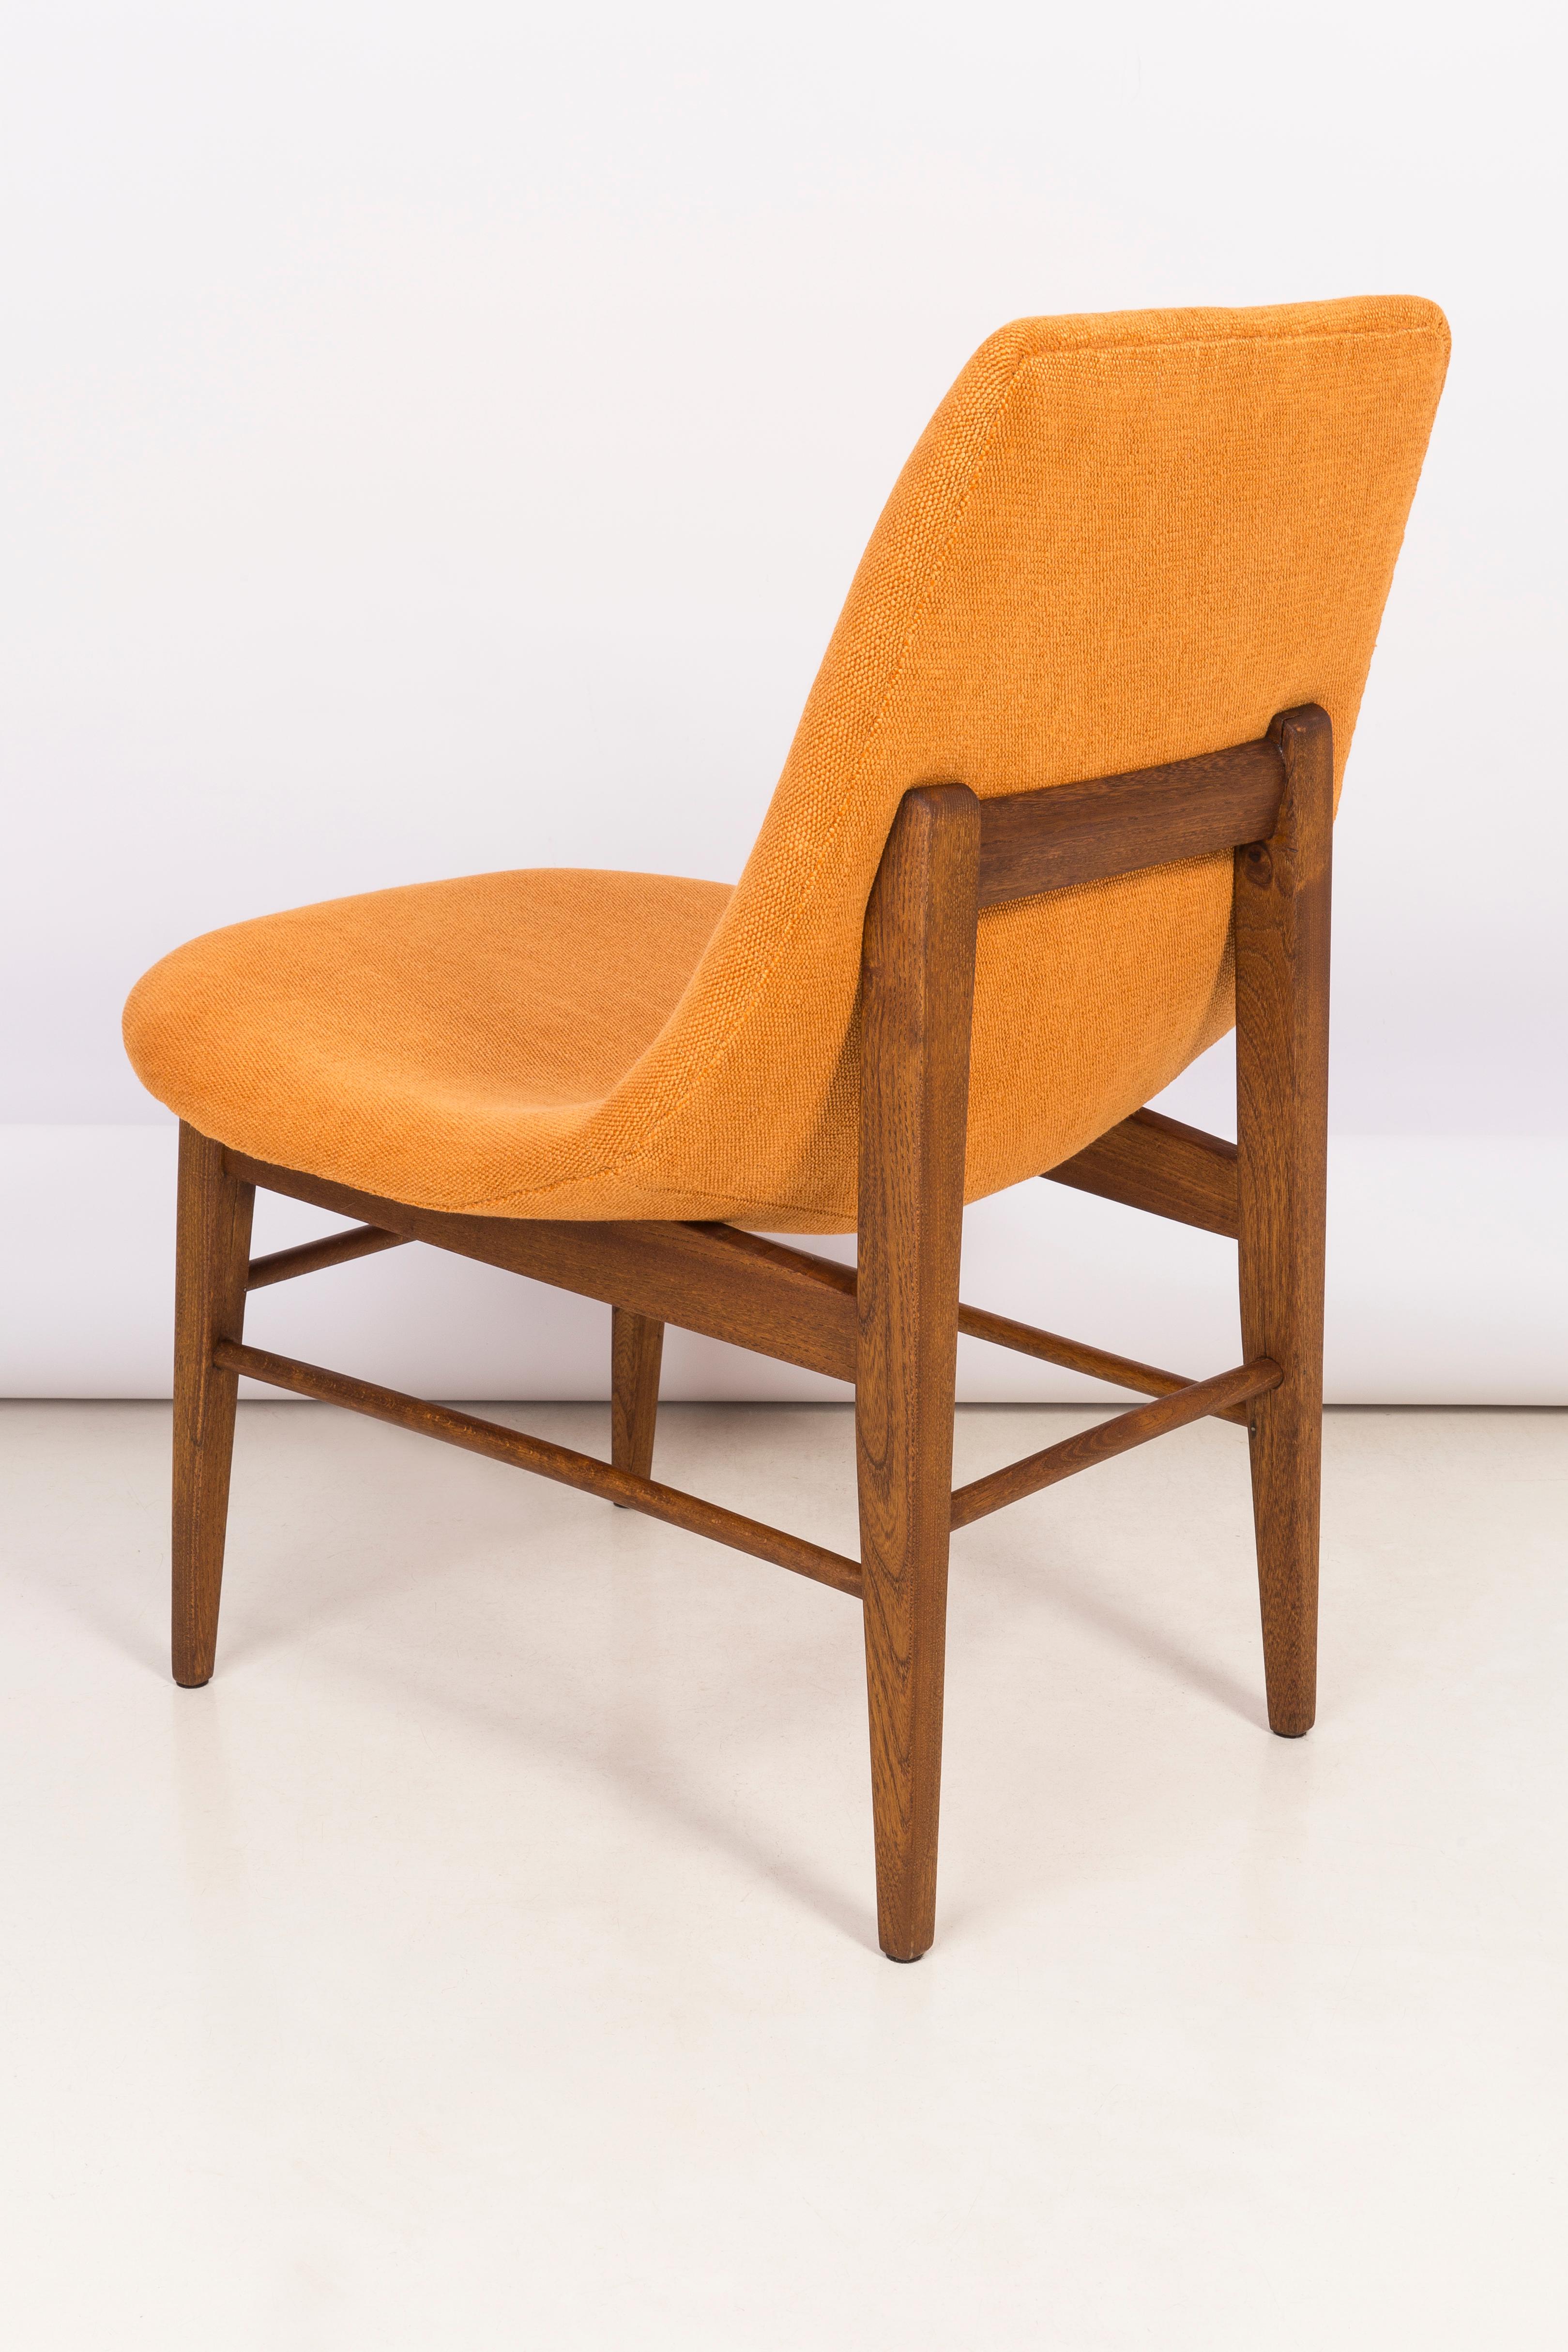 Set of Two Rare 20th Century Orange Shell Chairs, H. Lachert, 1960s For Sale 5